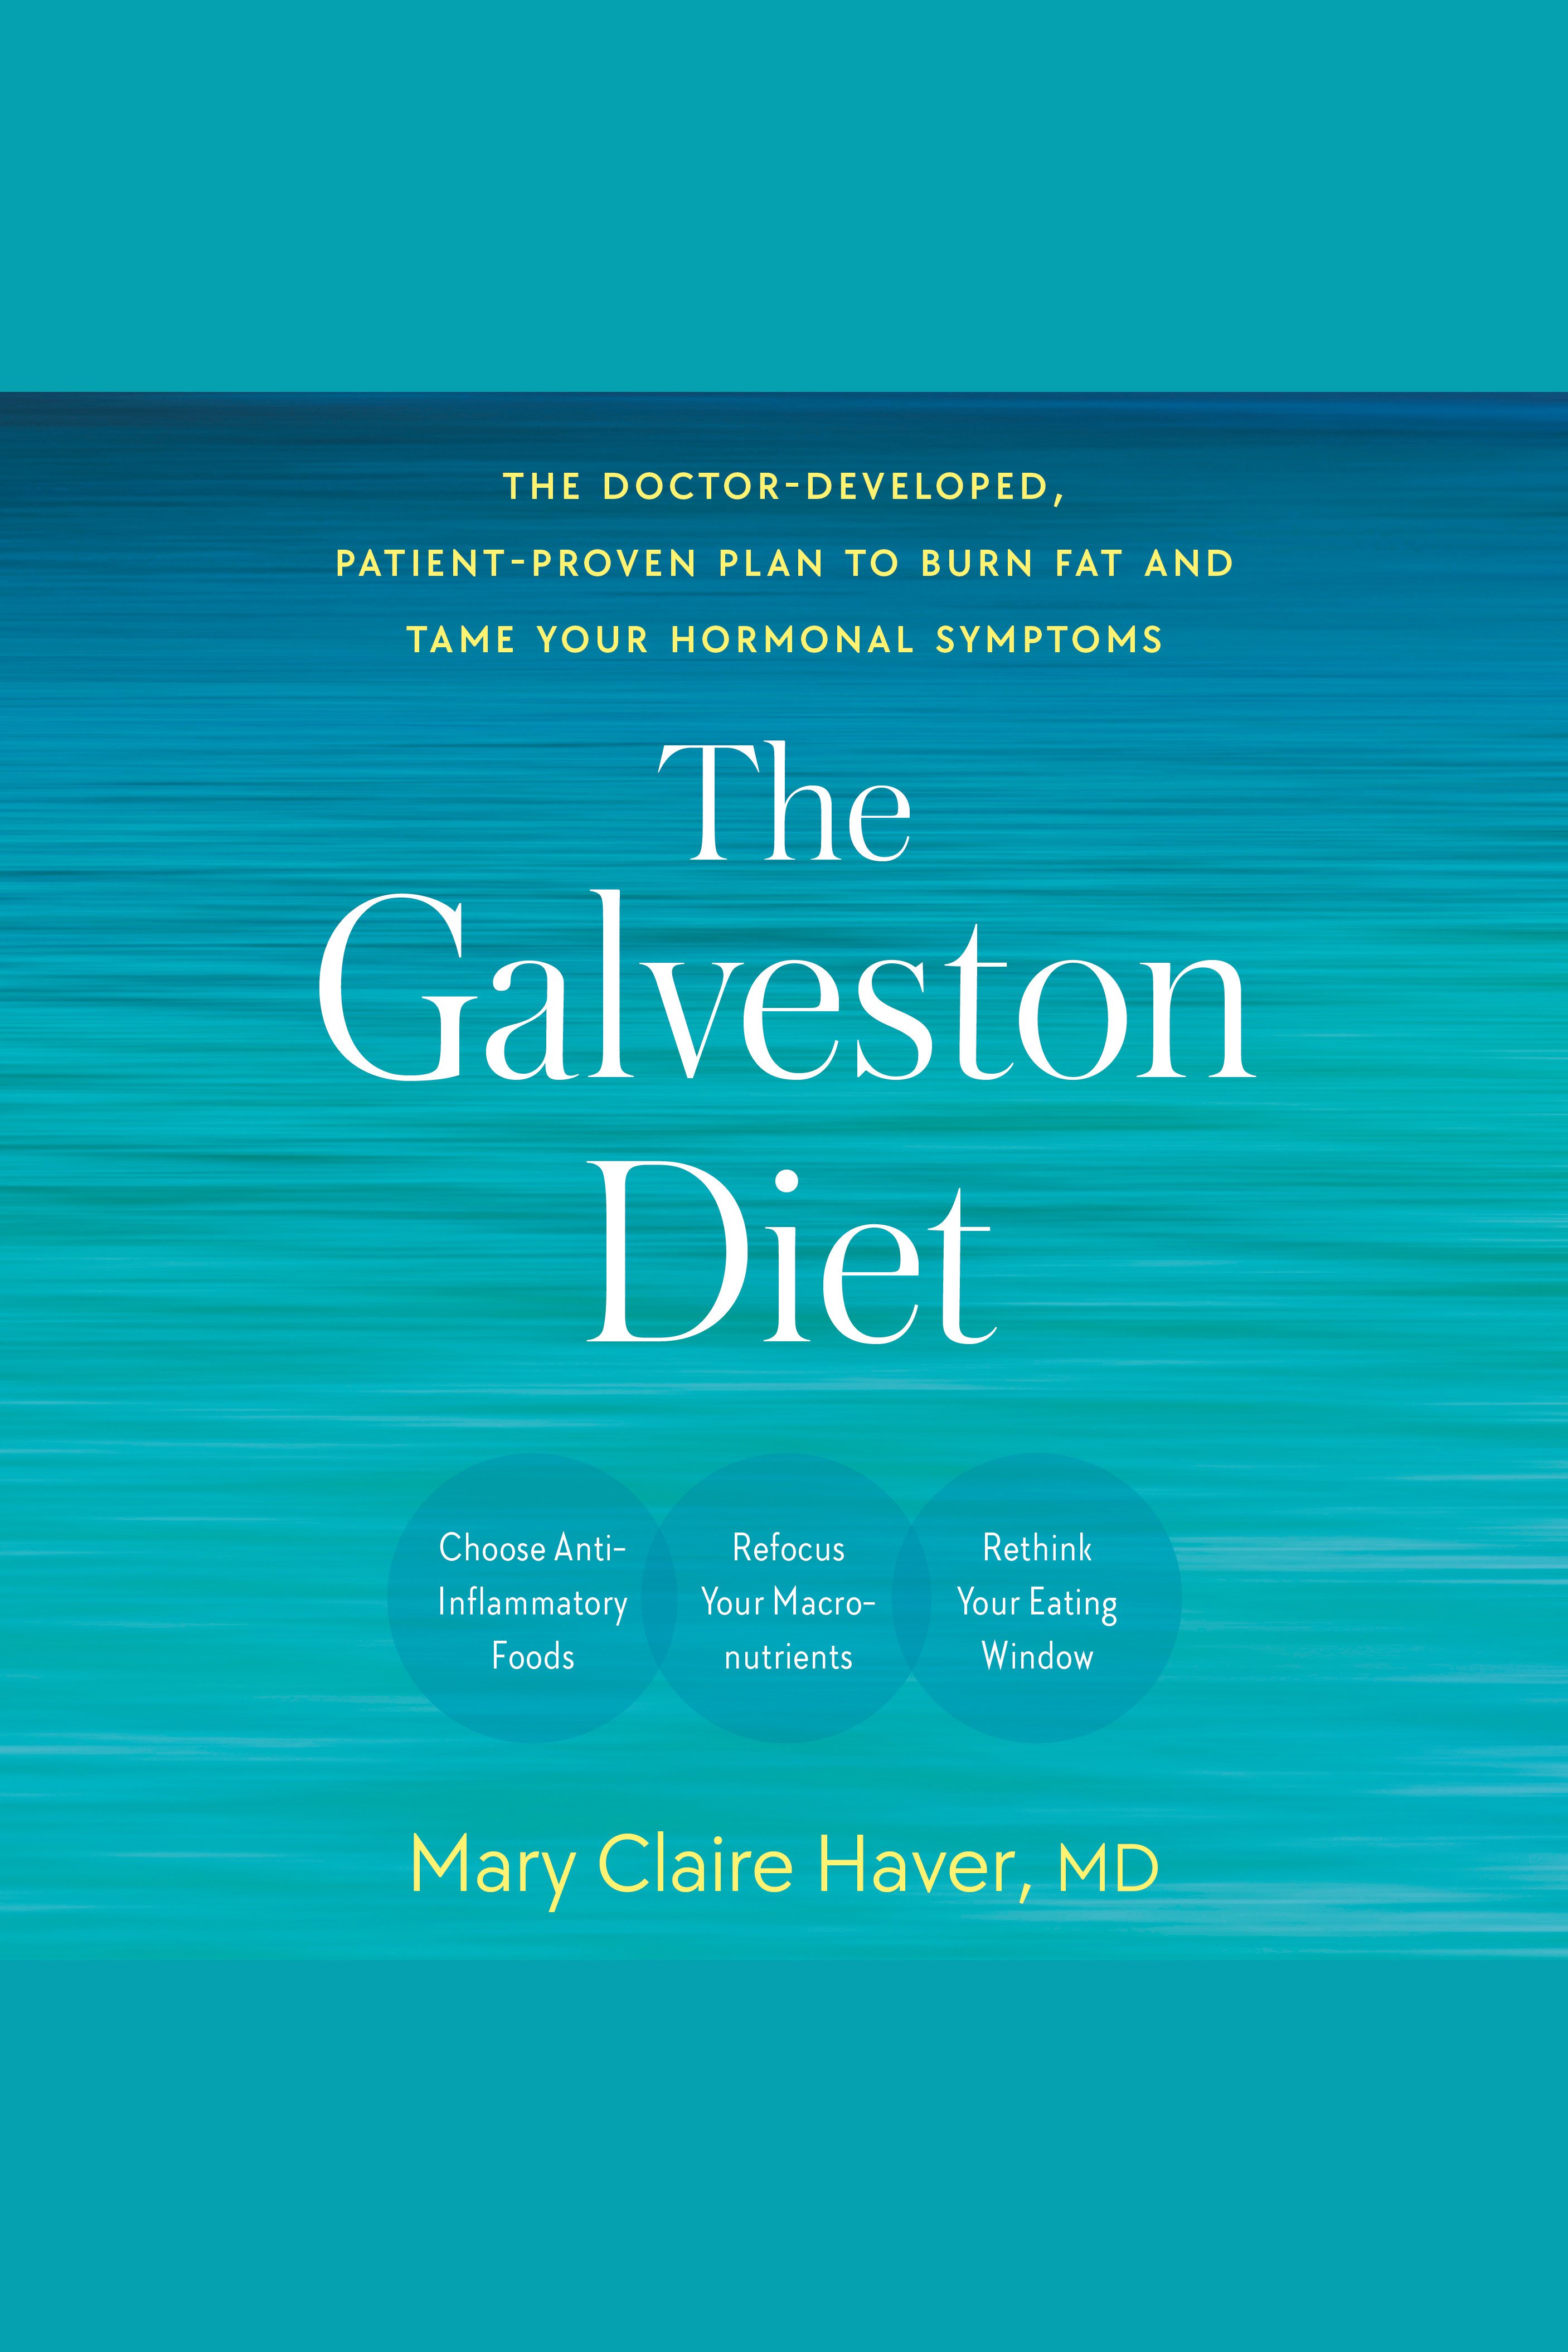 The Galveston Diet The Doctor-Developed, Patient-Proven Plan to Burn Fat and Tame Your Hormonal Symptoms cover image